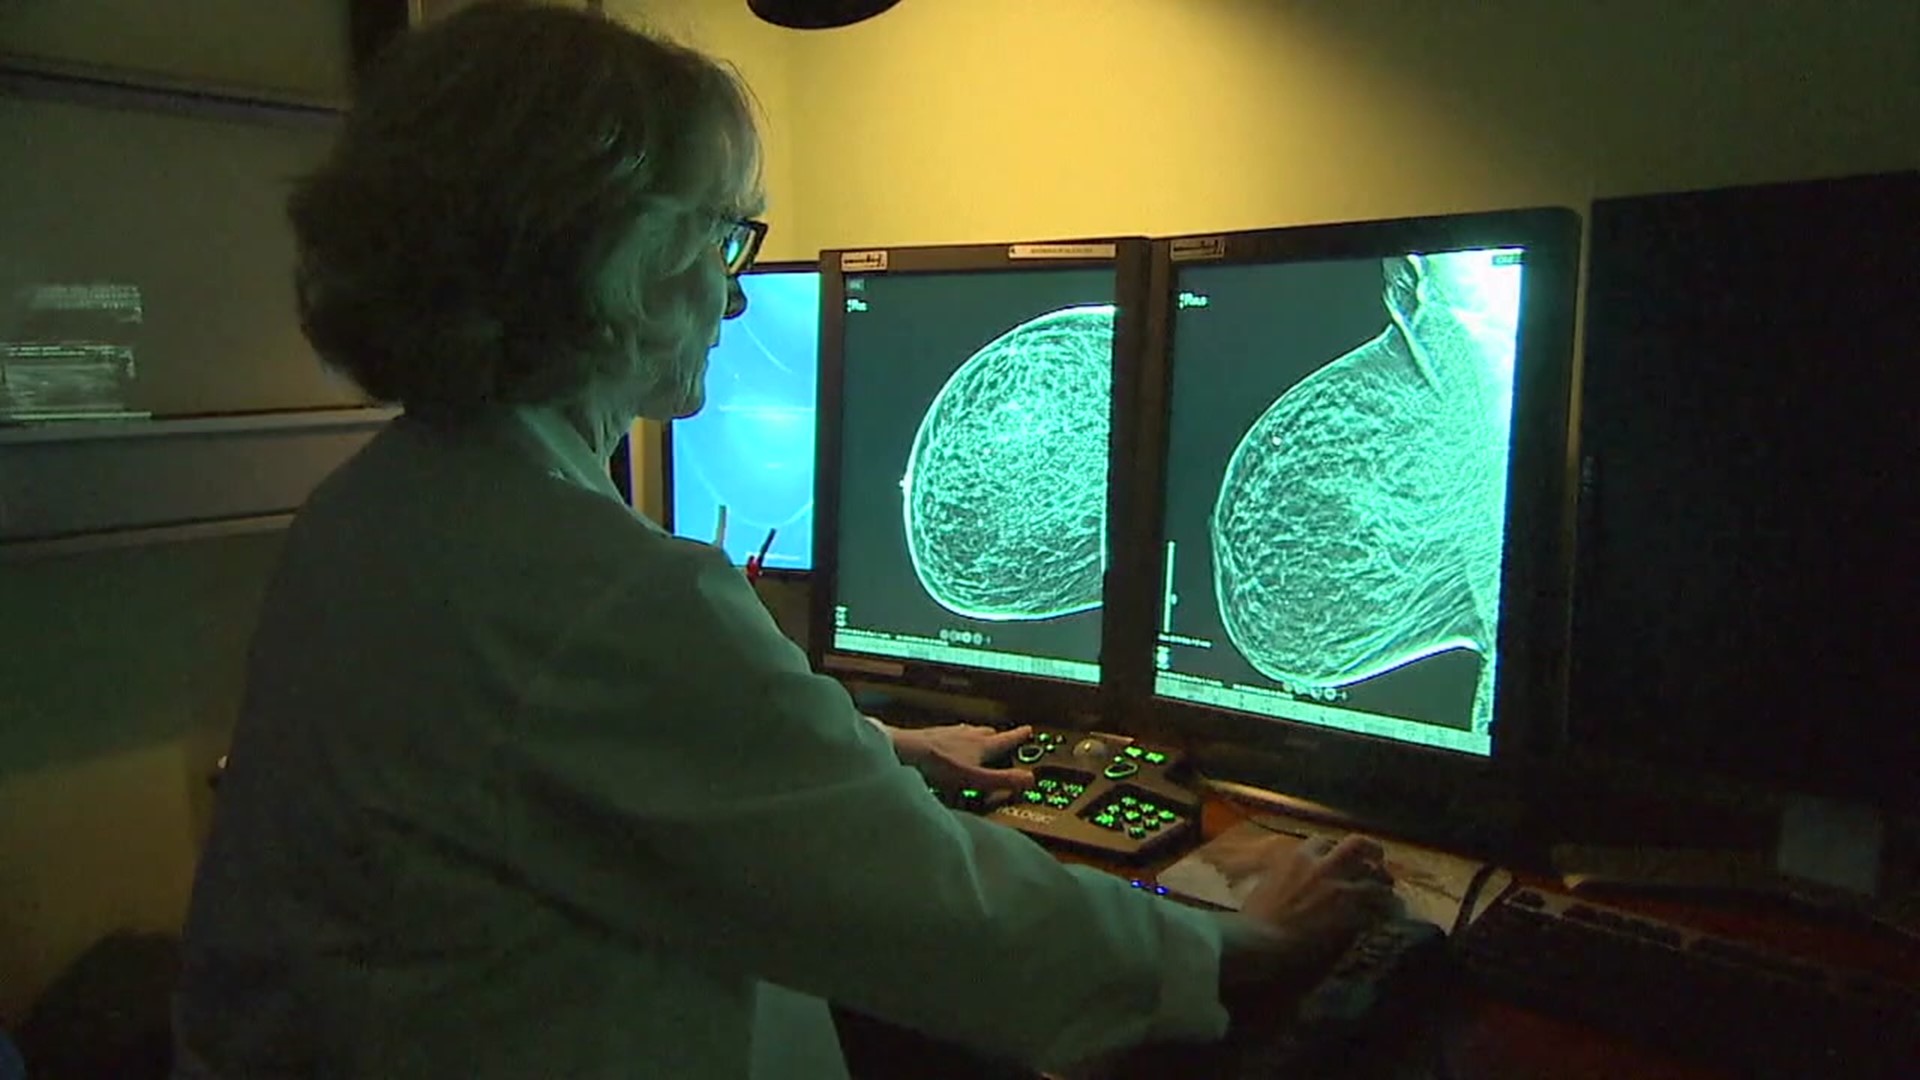 When a Geisinger patient is diagnosed with breast cancer, Rebecca Vanderveken or one of her coworkers is one of the first phone calls that the patient receives.